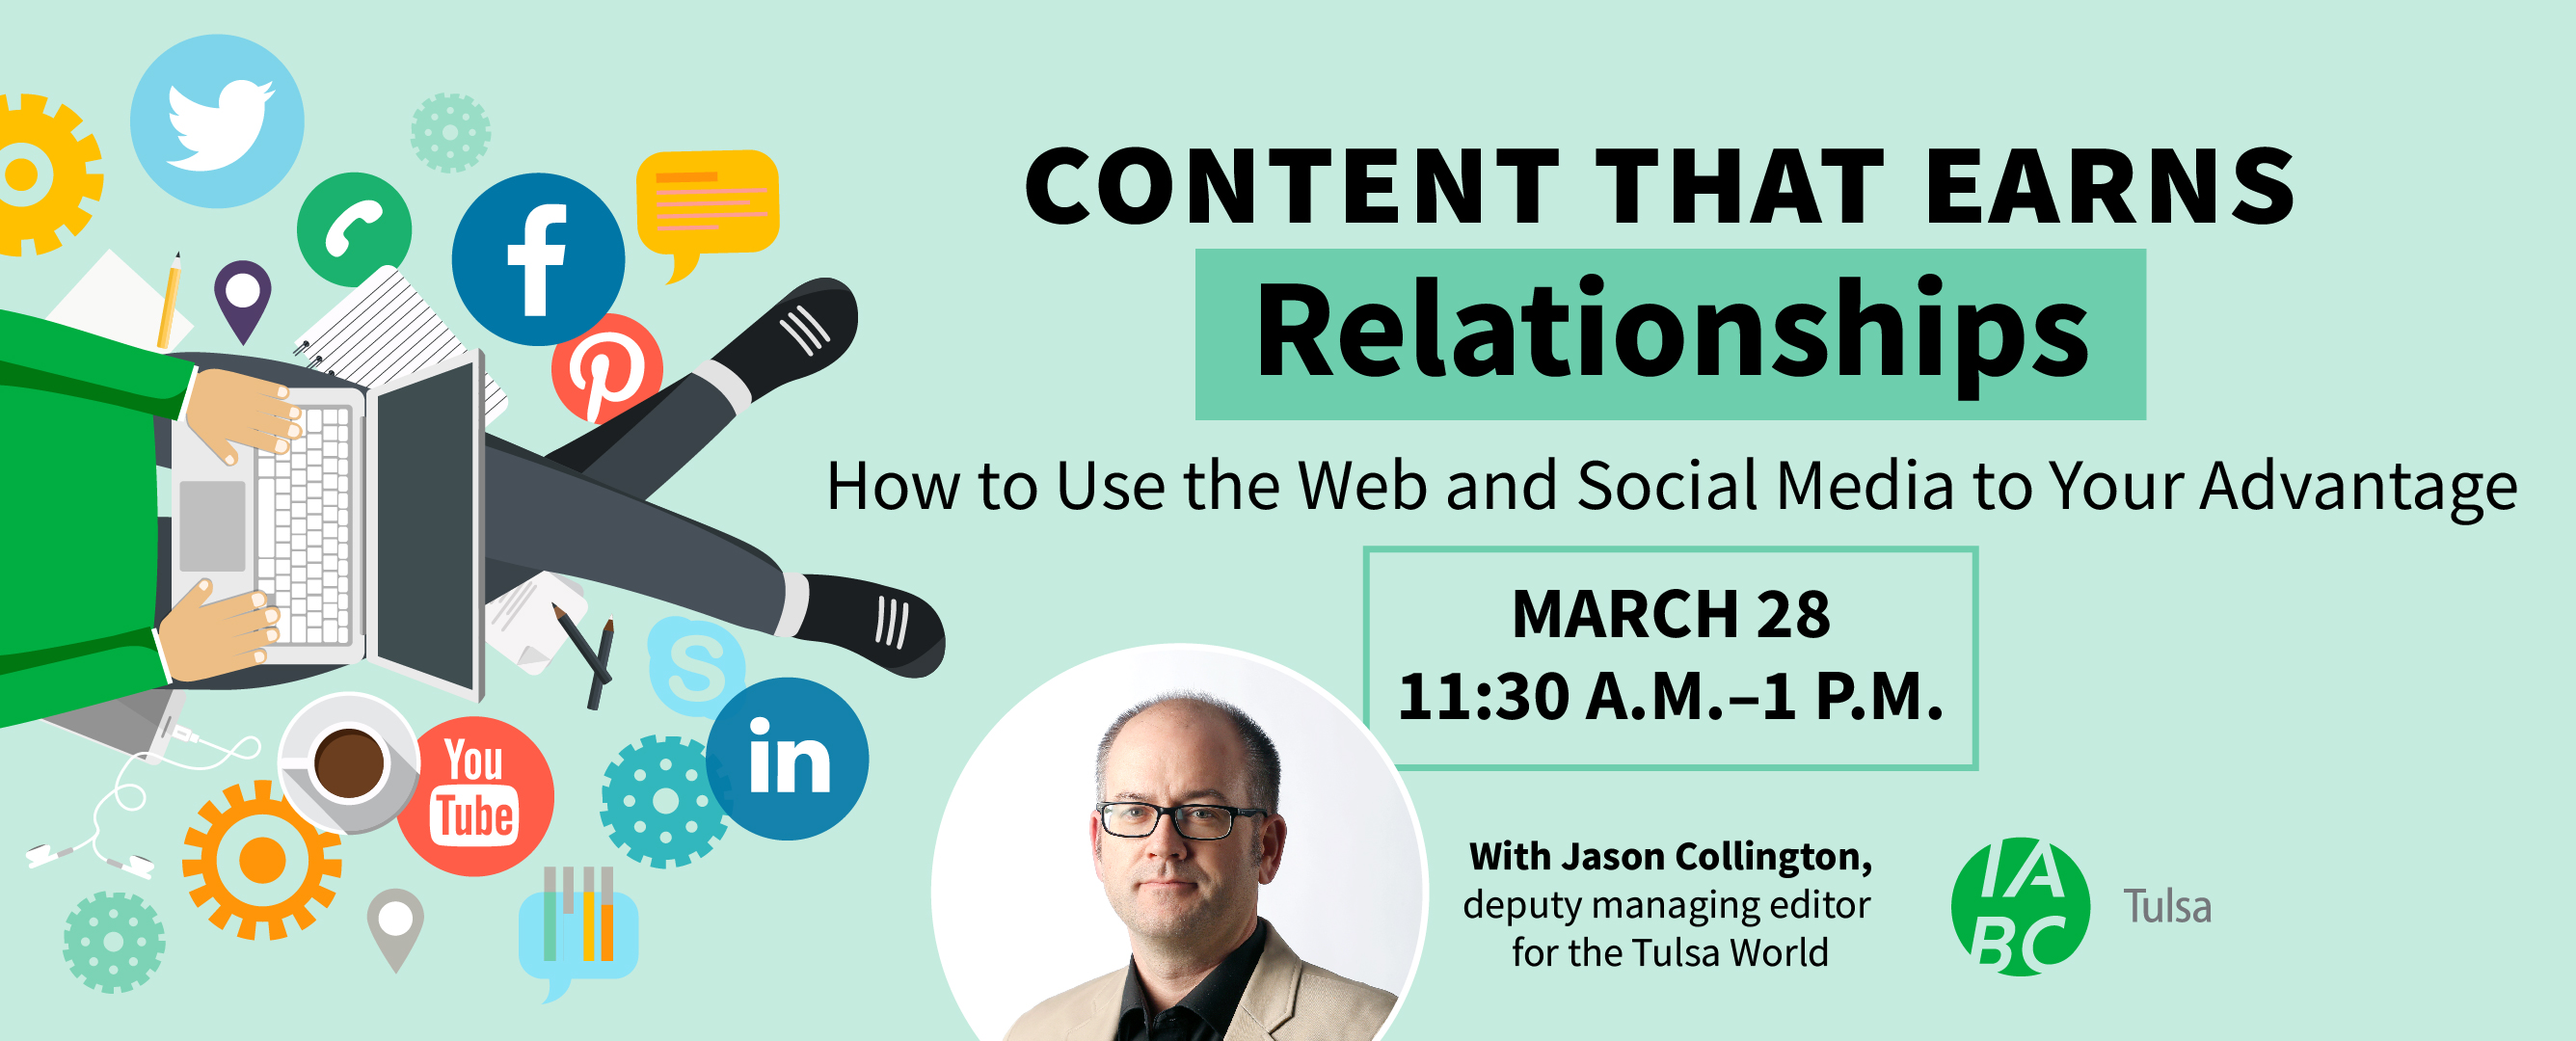 Content That Earns Relationships: How to Use the Web and Social Media to Your Advantage